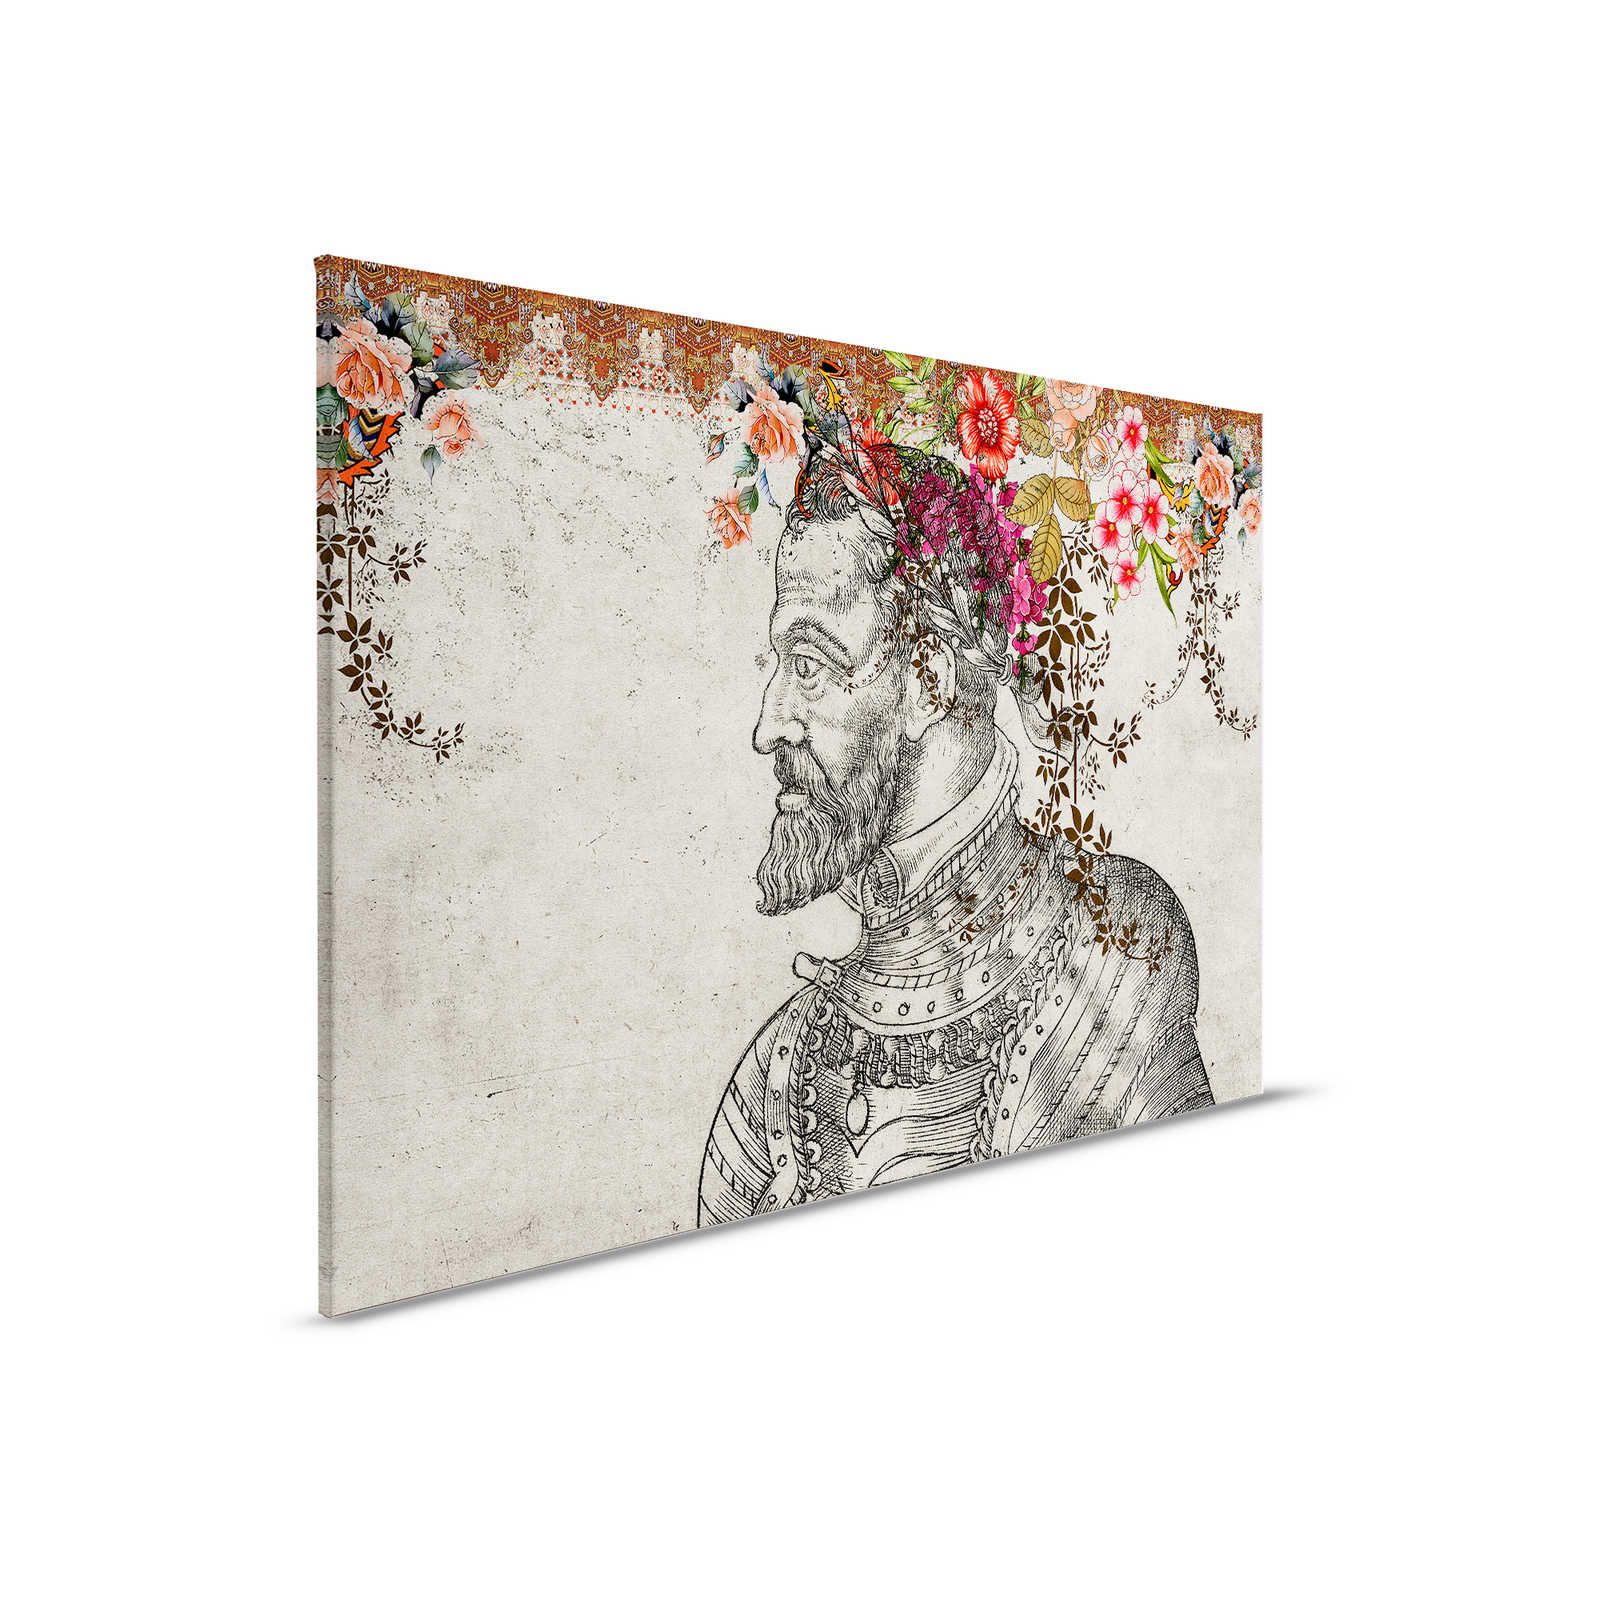 In the Gallery 2 - Canvas painting Historic Sketch & Floral Design - 0.90 m x 0.60 m
